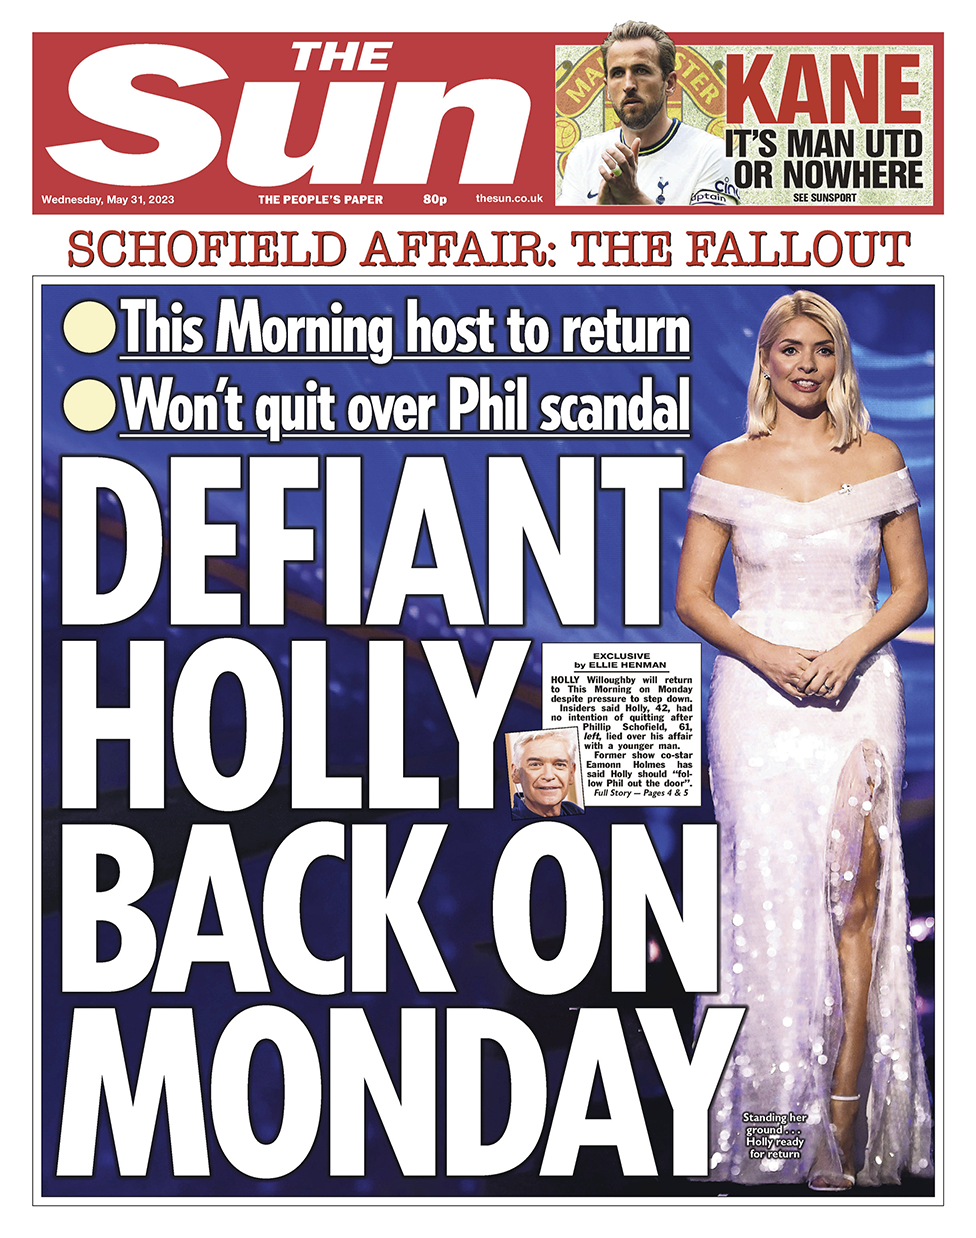 The headline in the Sun reads: "Defiant Holly back on Monday"